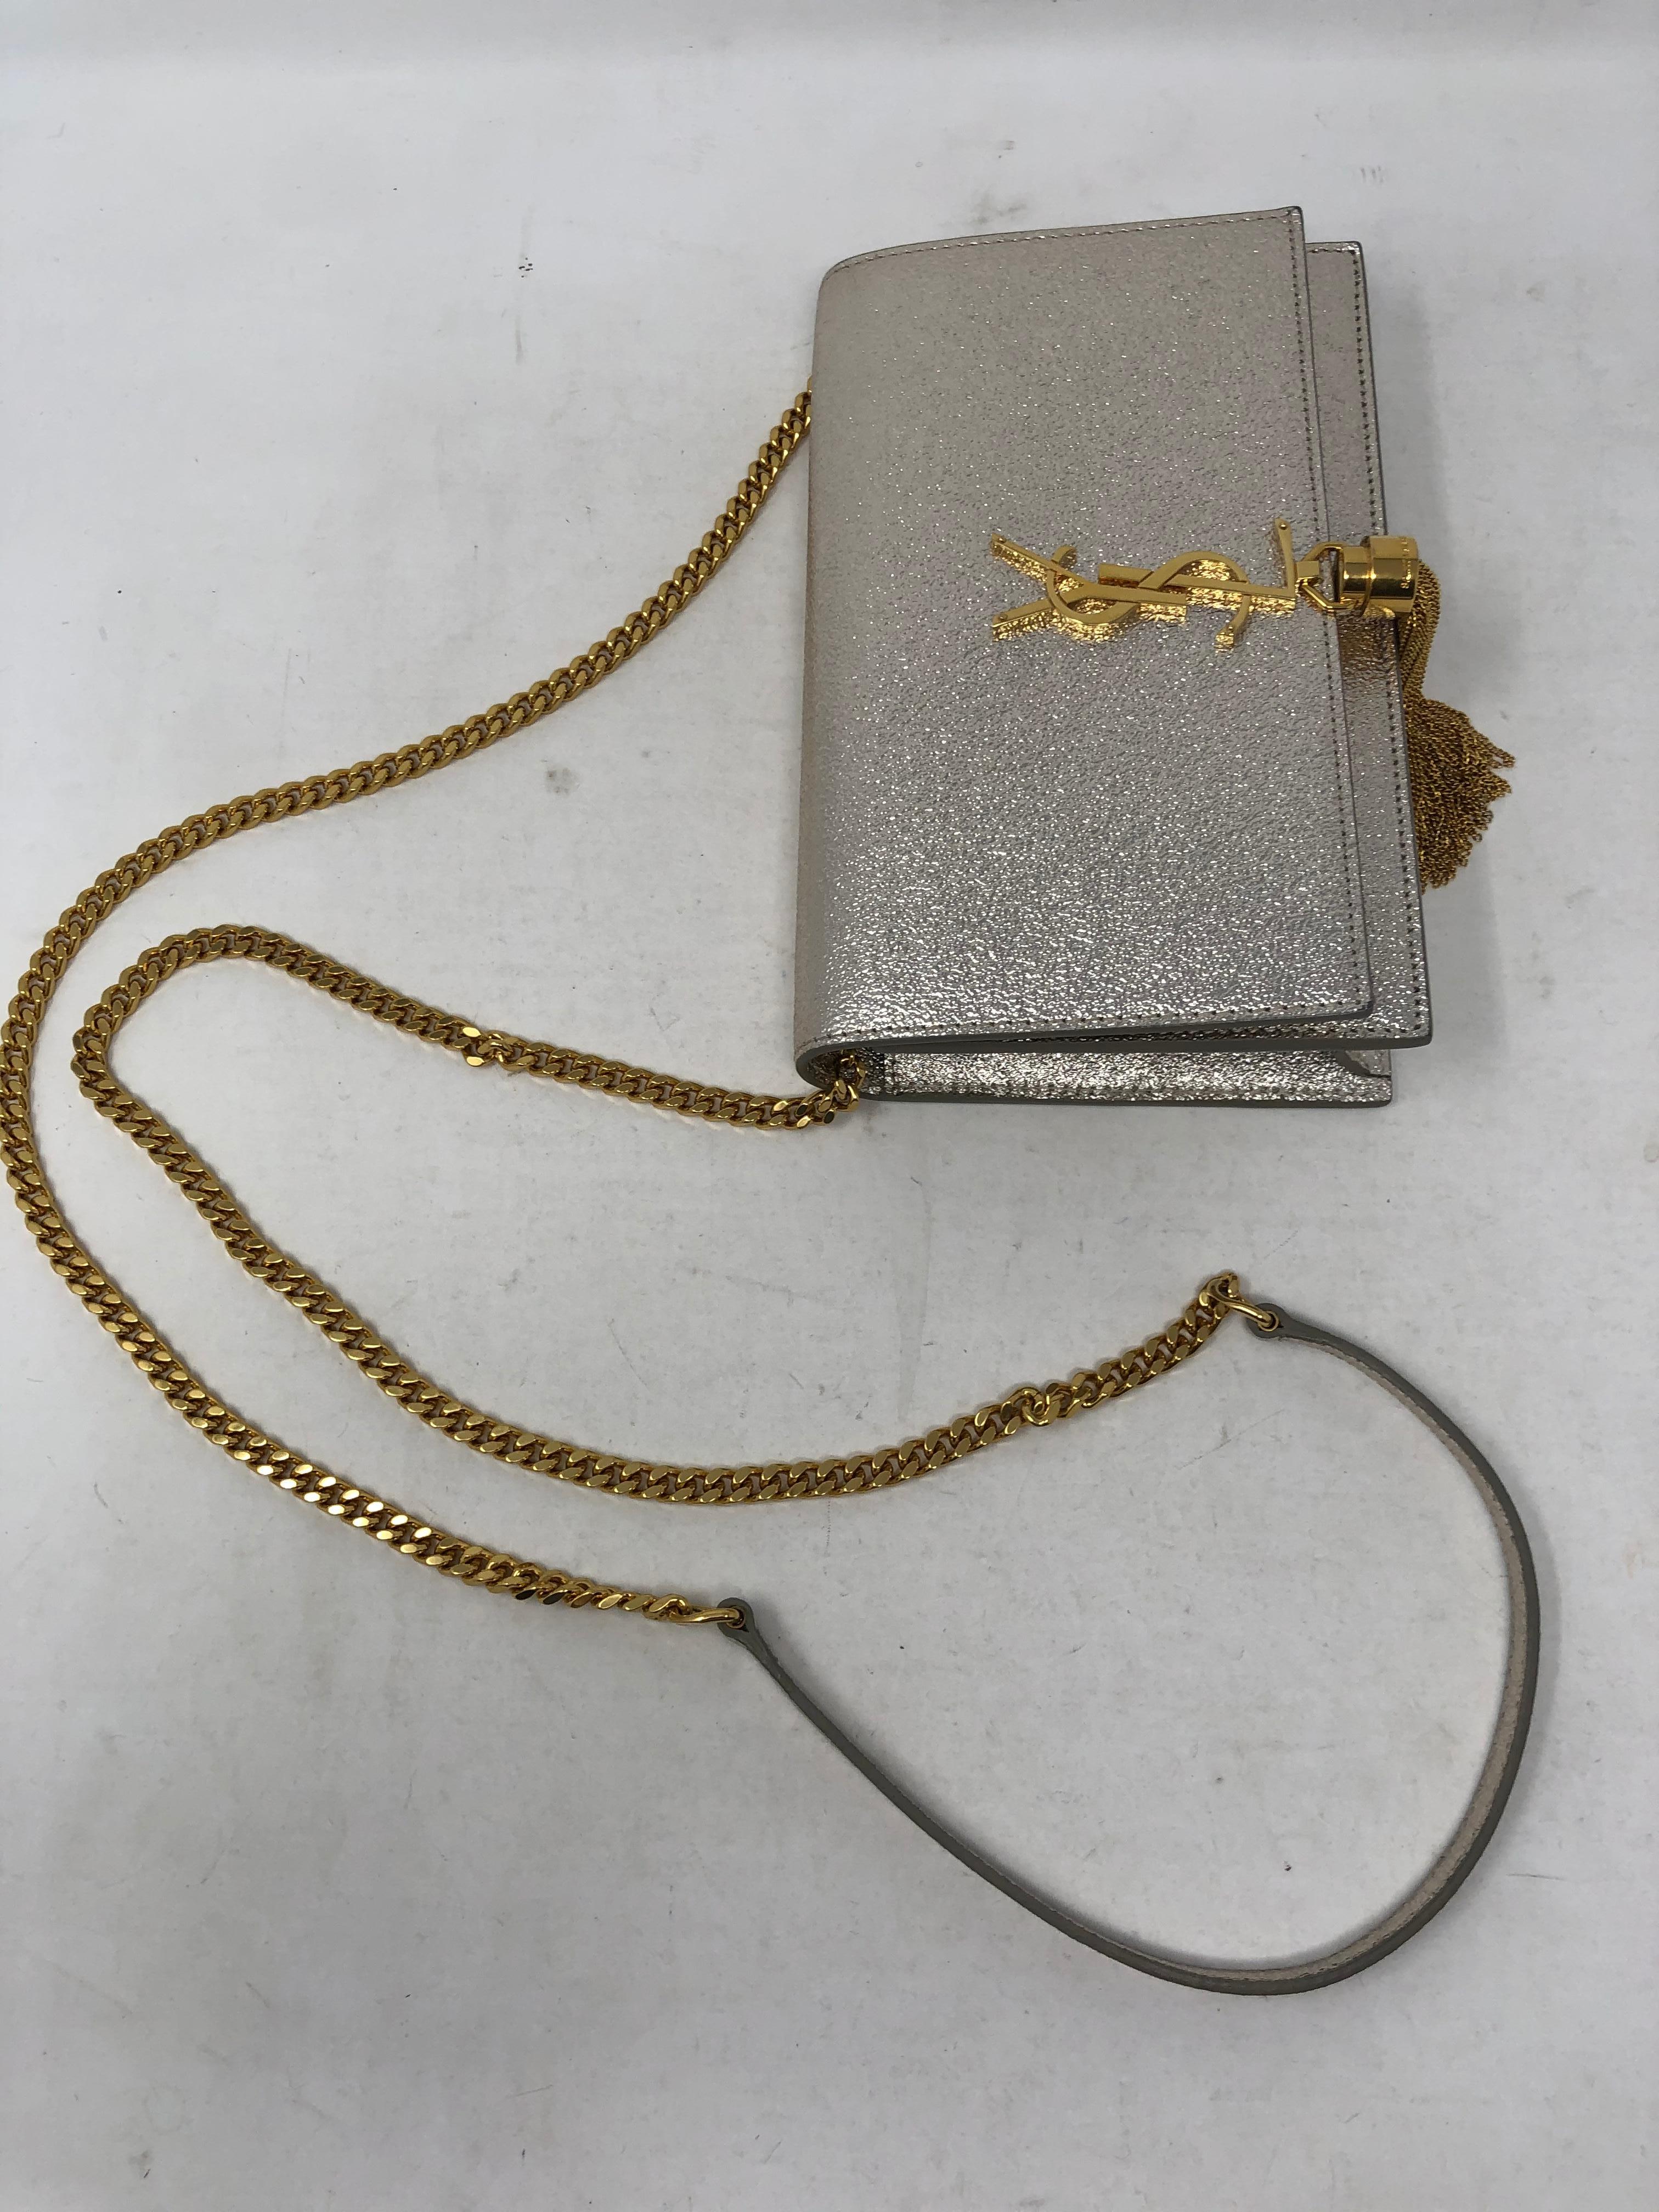 Yves Saint Laurent Kate Metallic Silver and Gold Bag. Can be worn as a crossbody or a clutch. Beautiful silver metallic leather and gold YSL with tassel. Excellent condition. Includes YSL dust cover. Guaranteed authentic. 